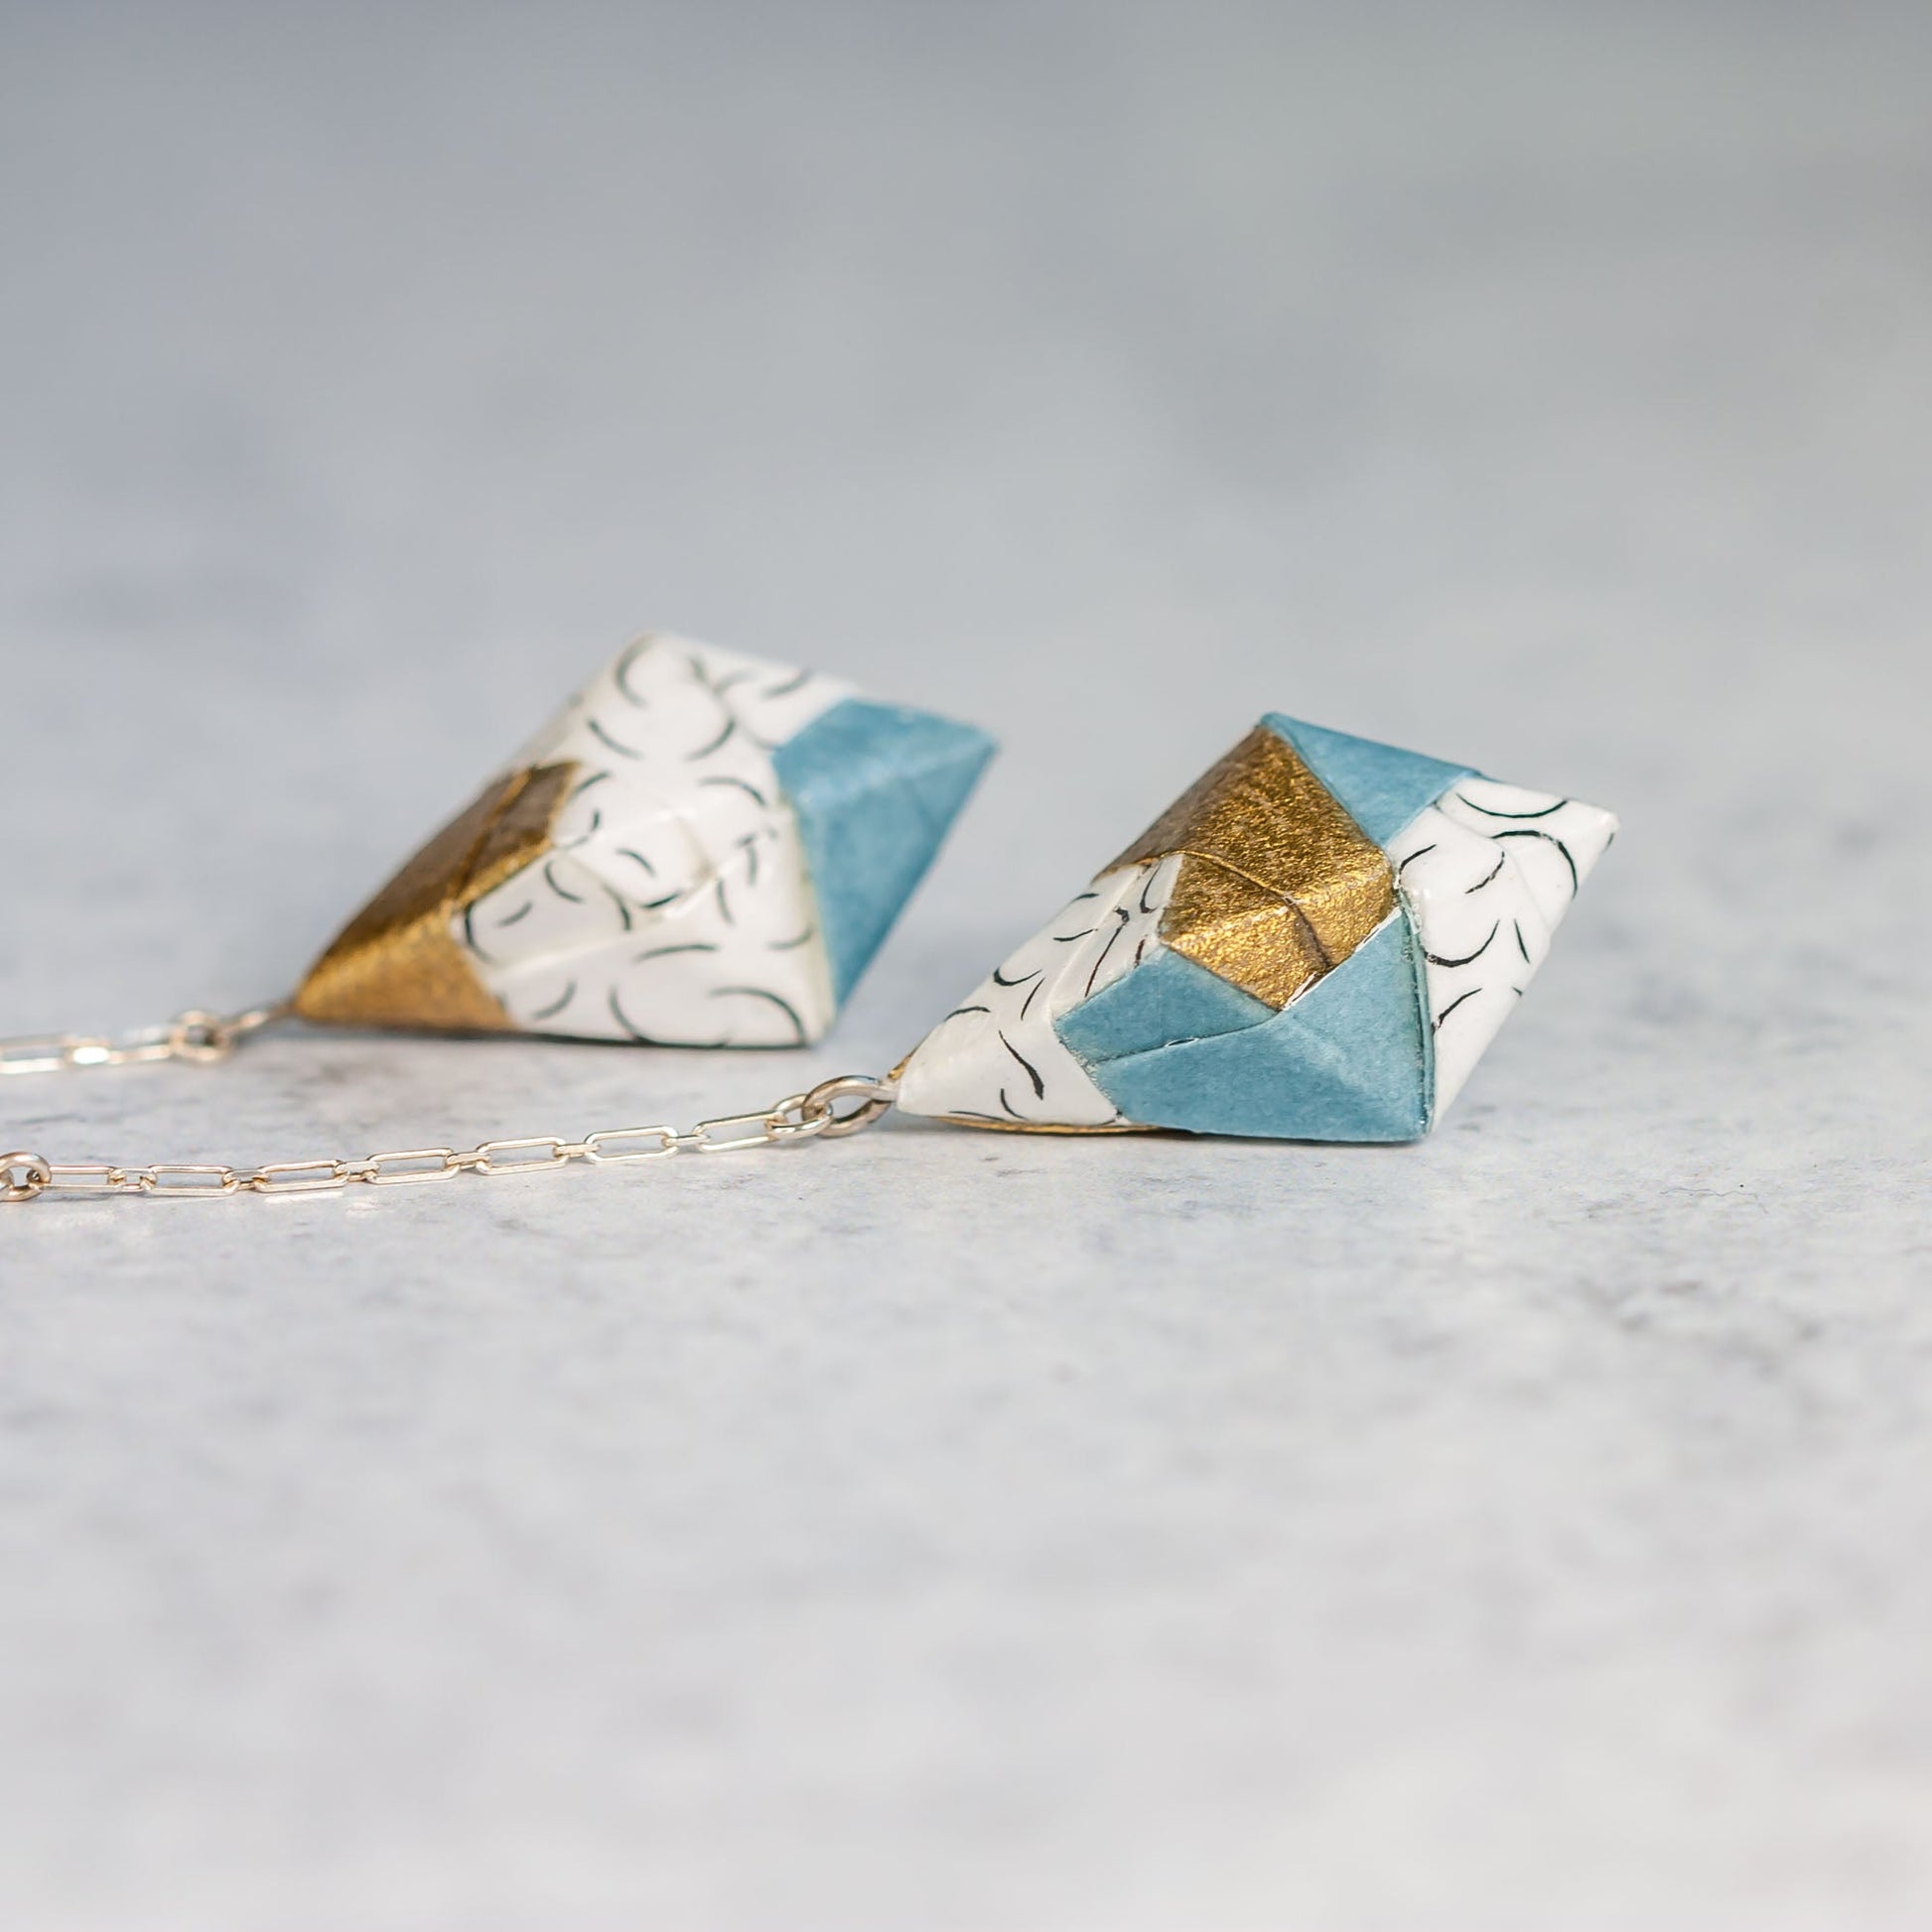 Origami Diamond Paper Earrings - Moons Gold Gray - By LeeMo Designs in Bend, Oregon